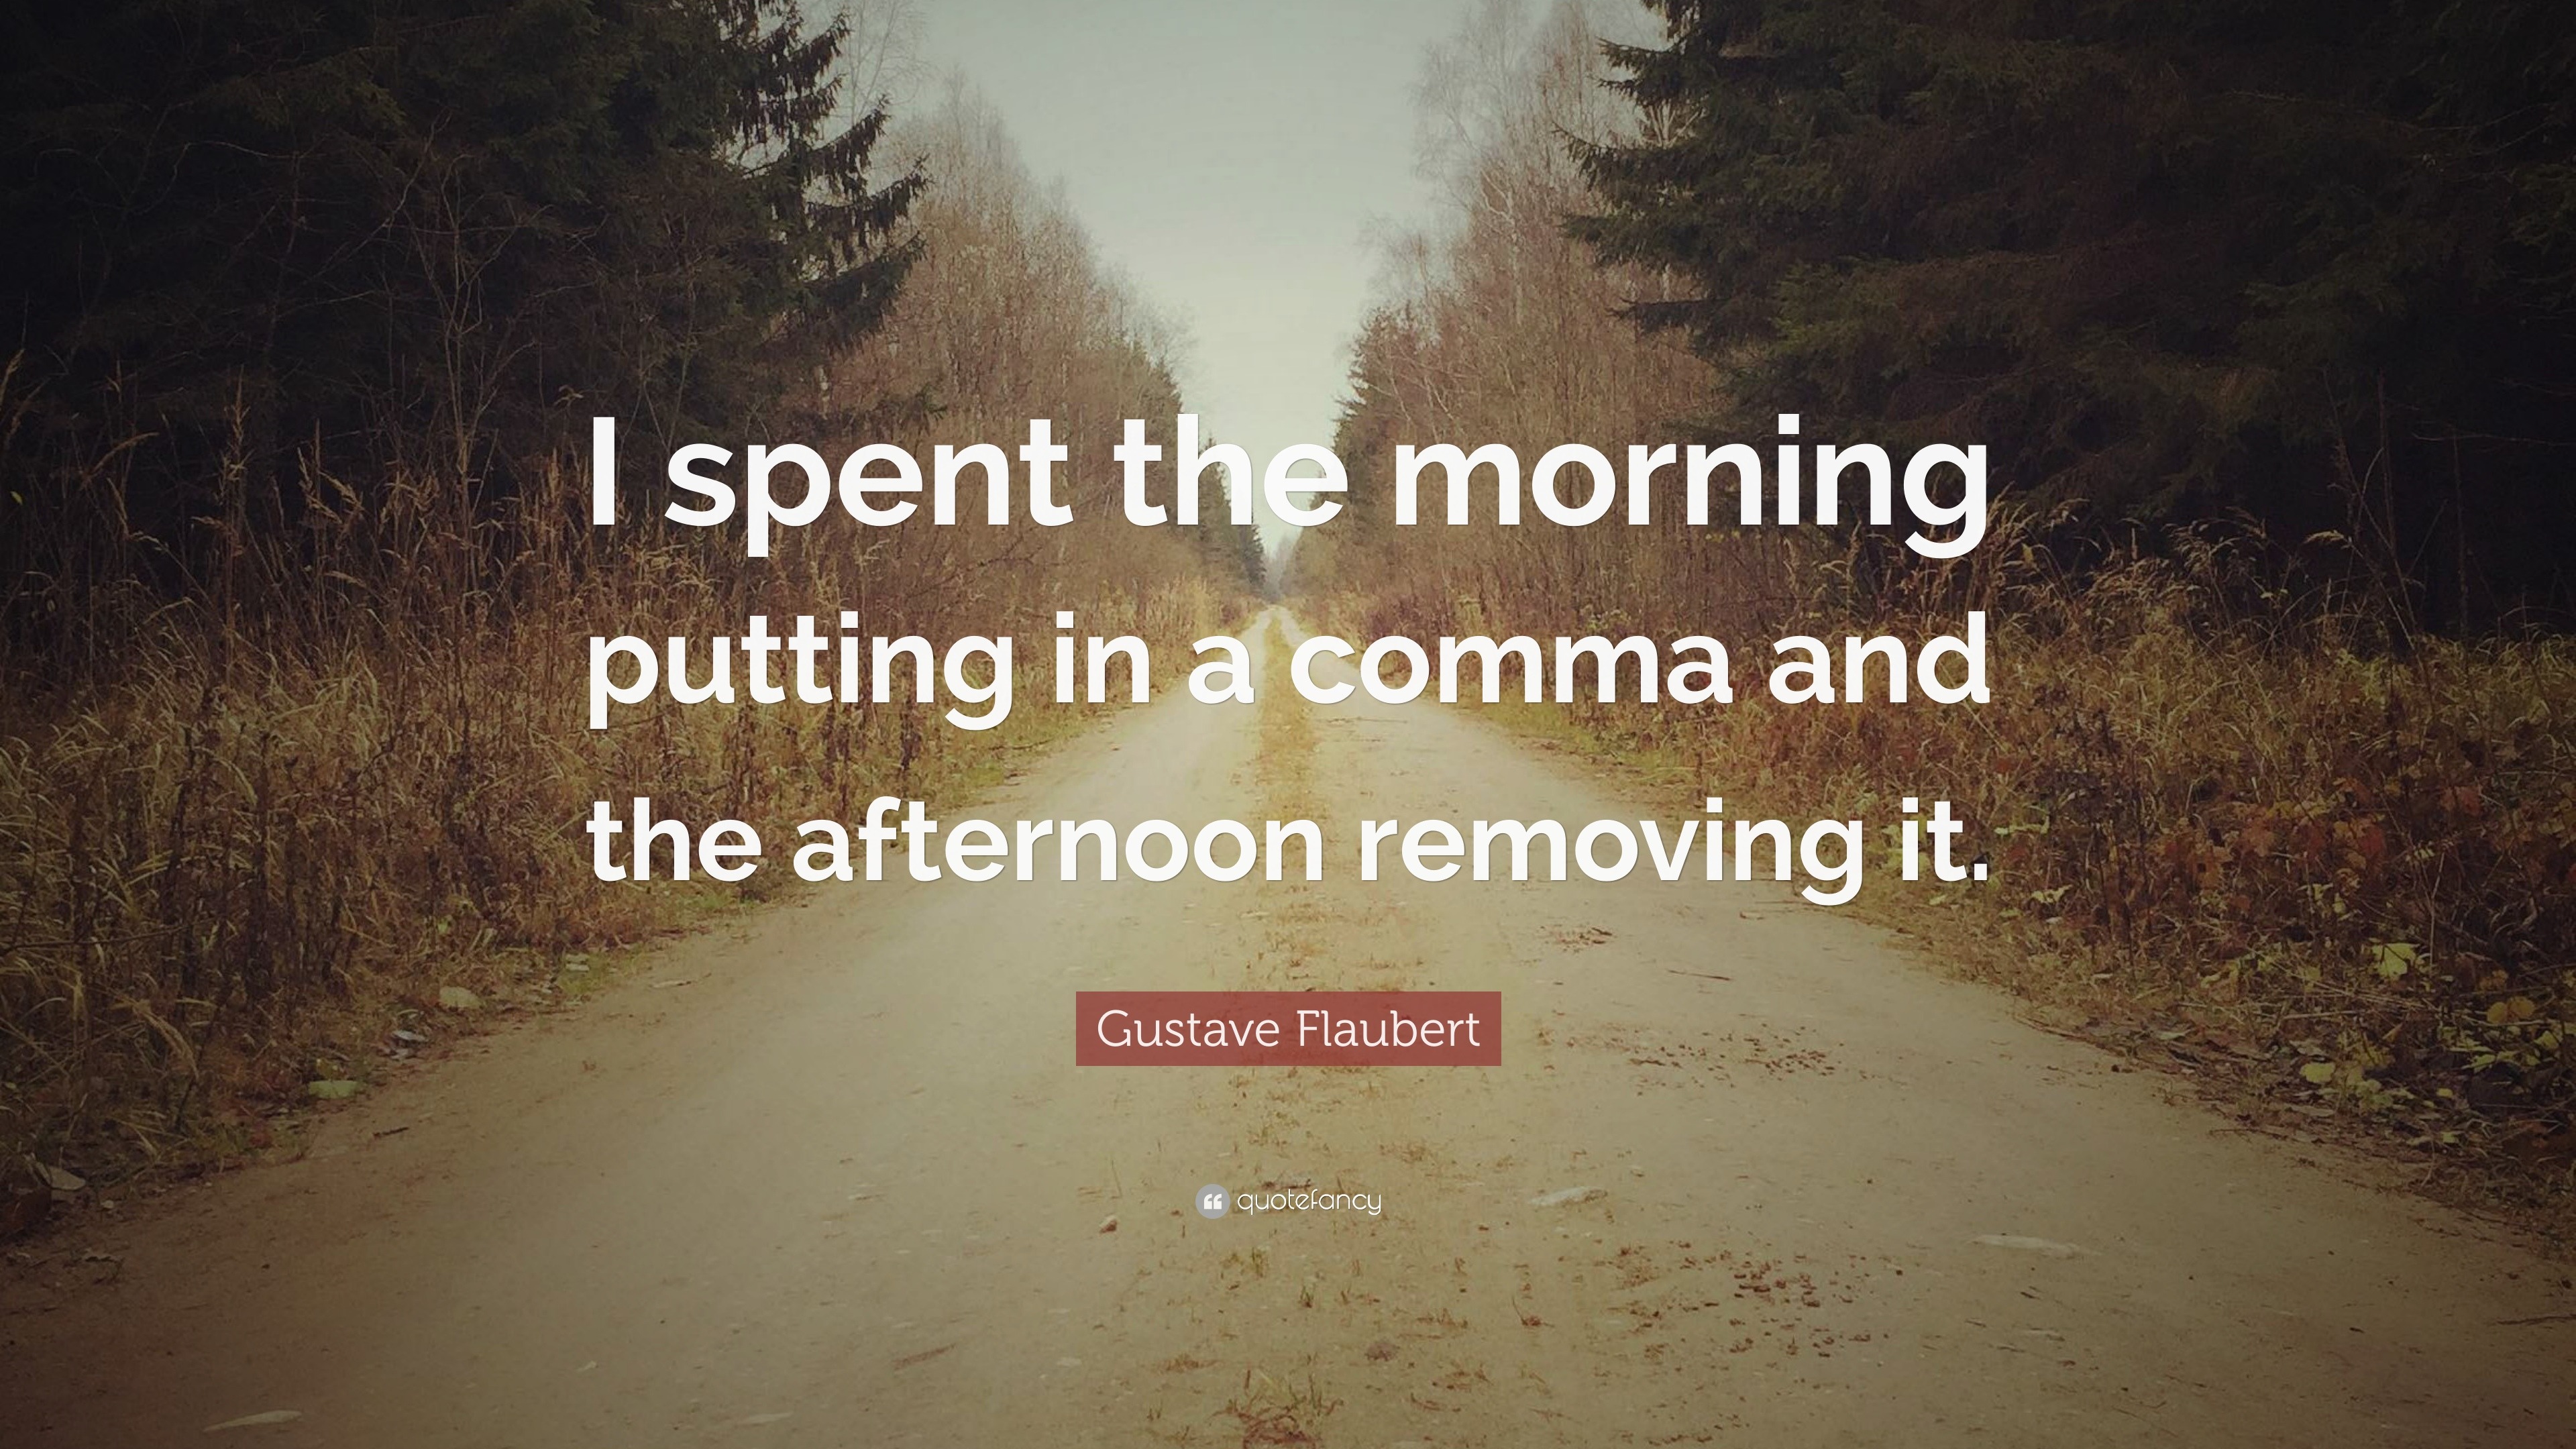 Gustave Flaubert Quote: “I spent the morning putting in a comma and the